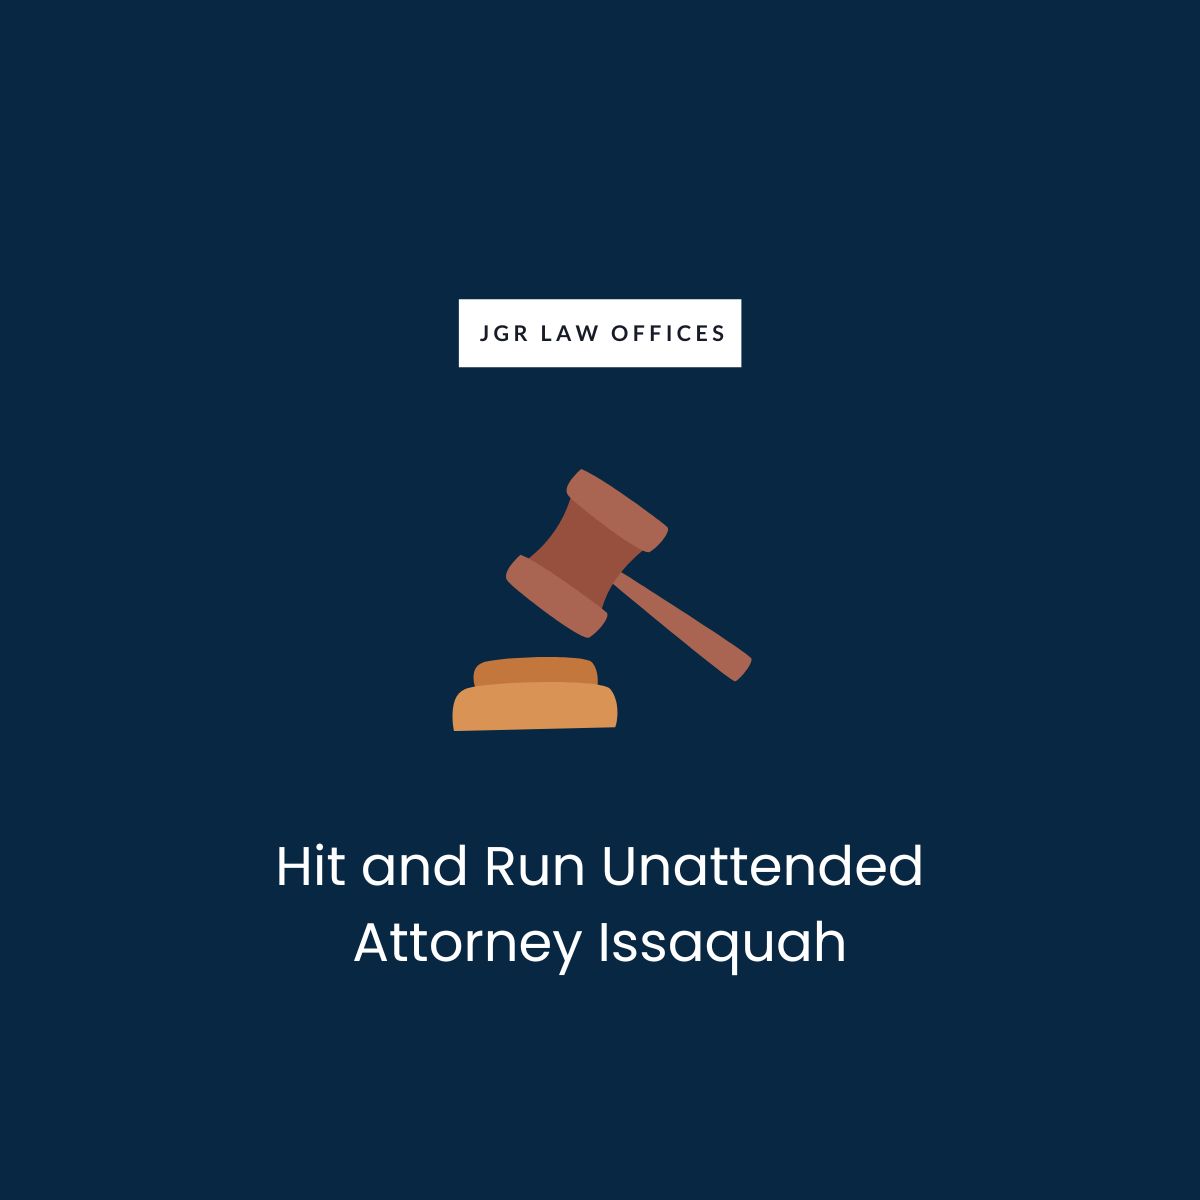 Hit and Run Unattended Lawyer Issaquah Hit and Run Unattended